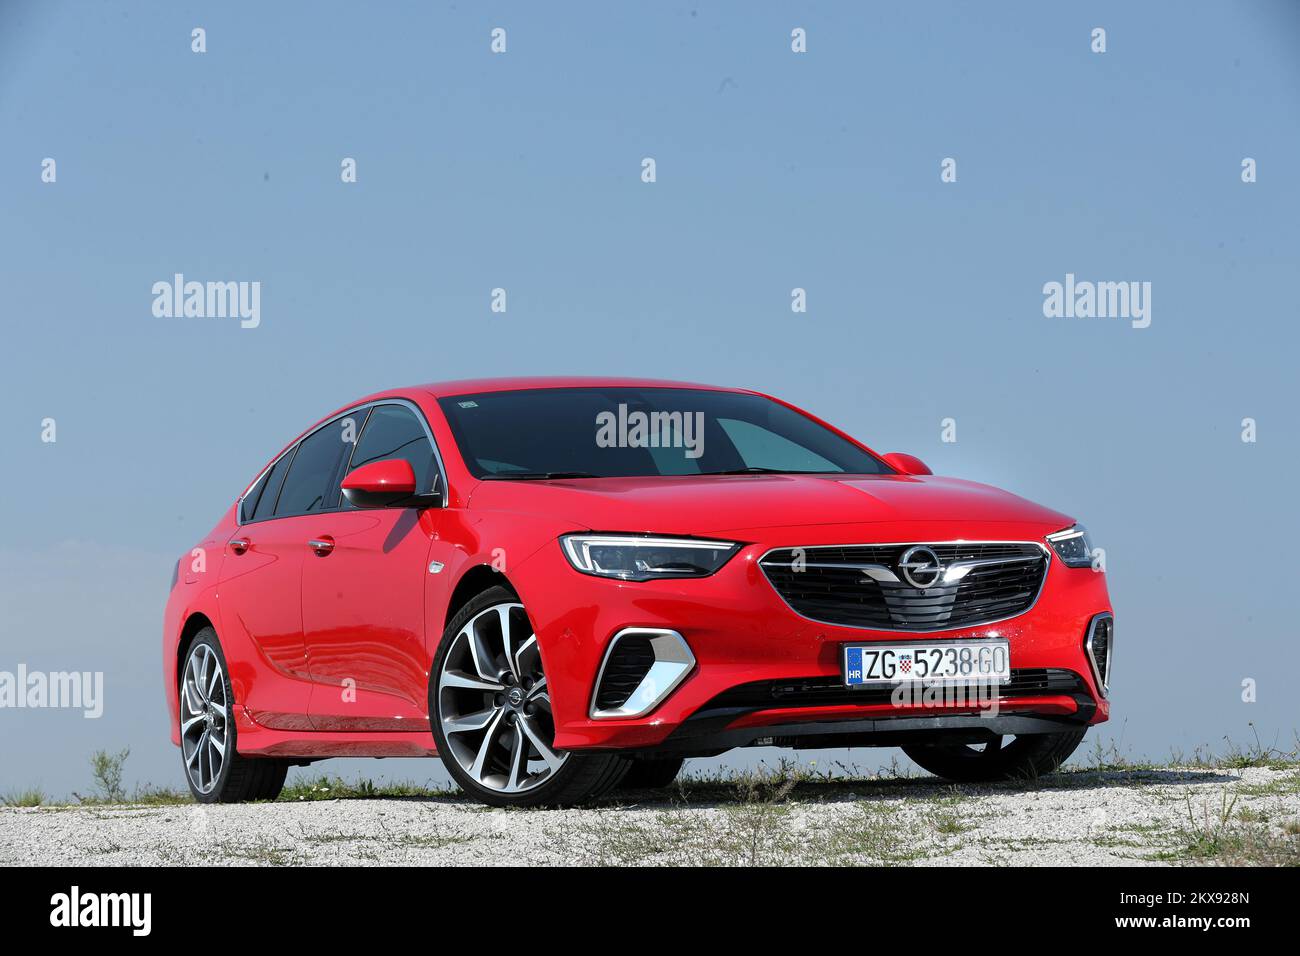 Brussels, Belgium, Jan 2020 OPEL Insignia Sports Tourer, Brussels Motor  Show, 2nd gen facelift, B / MkII, large family car produced by Opel Stock  Photo - Alamy